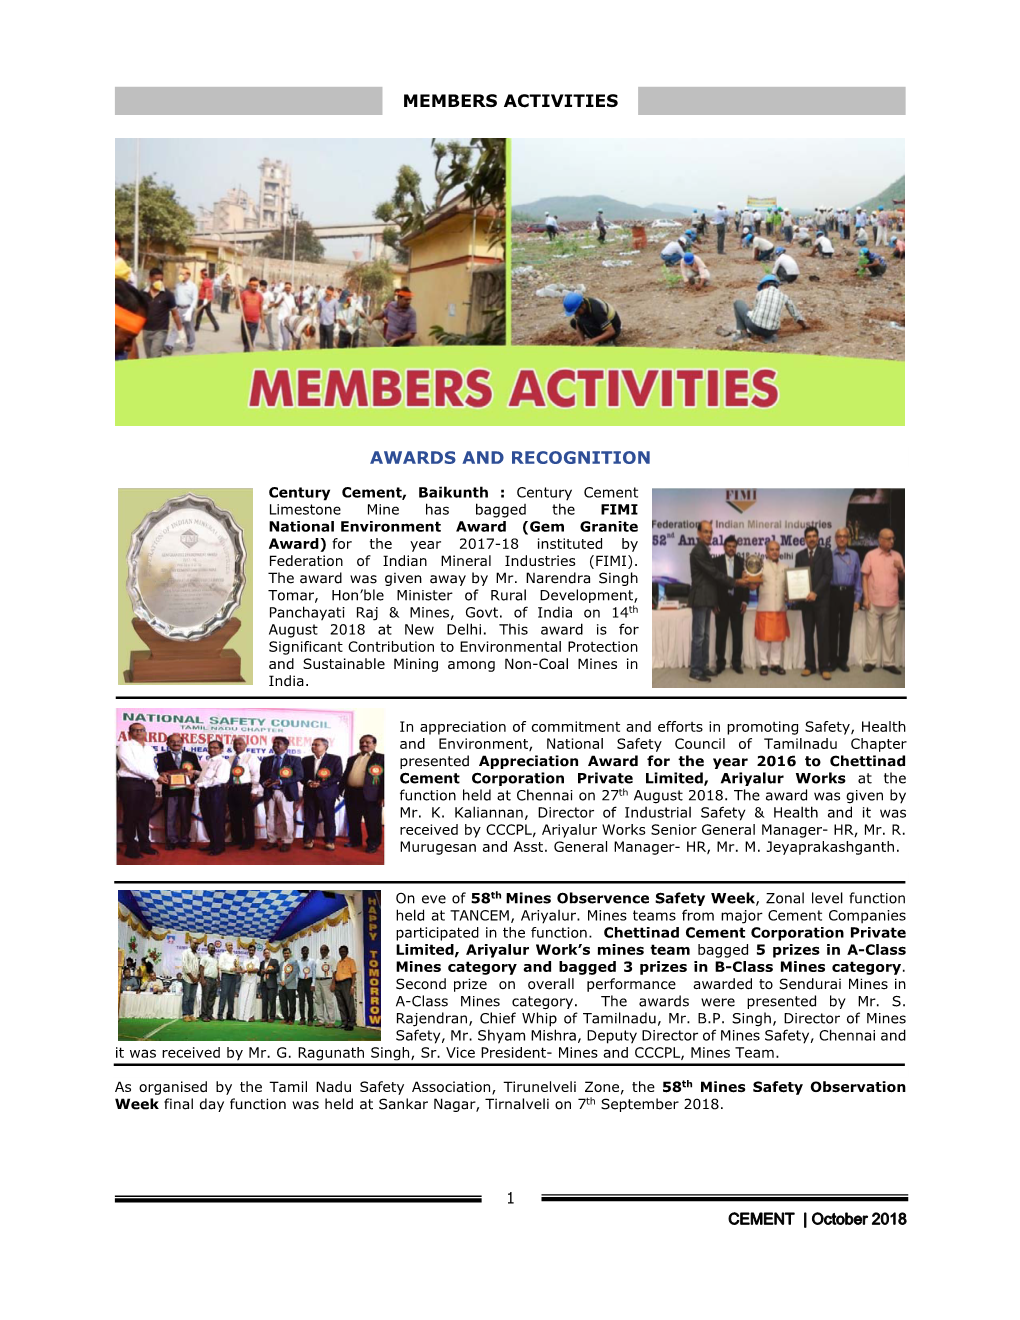 Members Activities Awards and Recognition